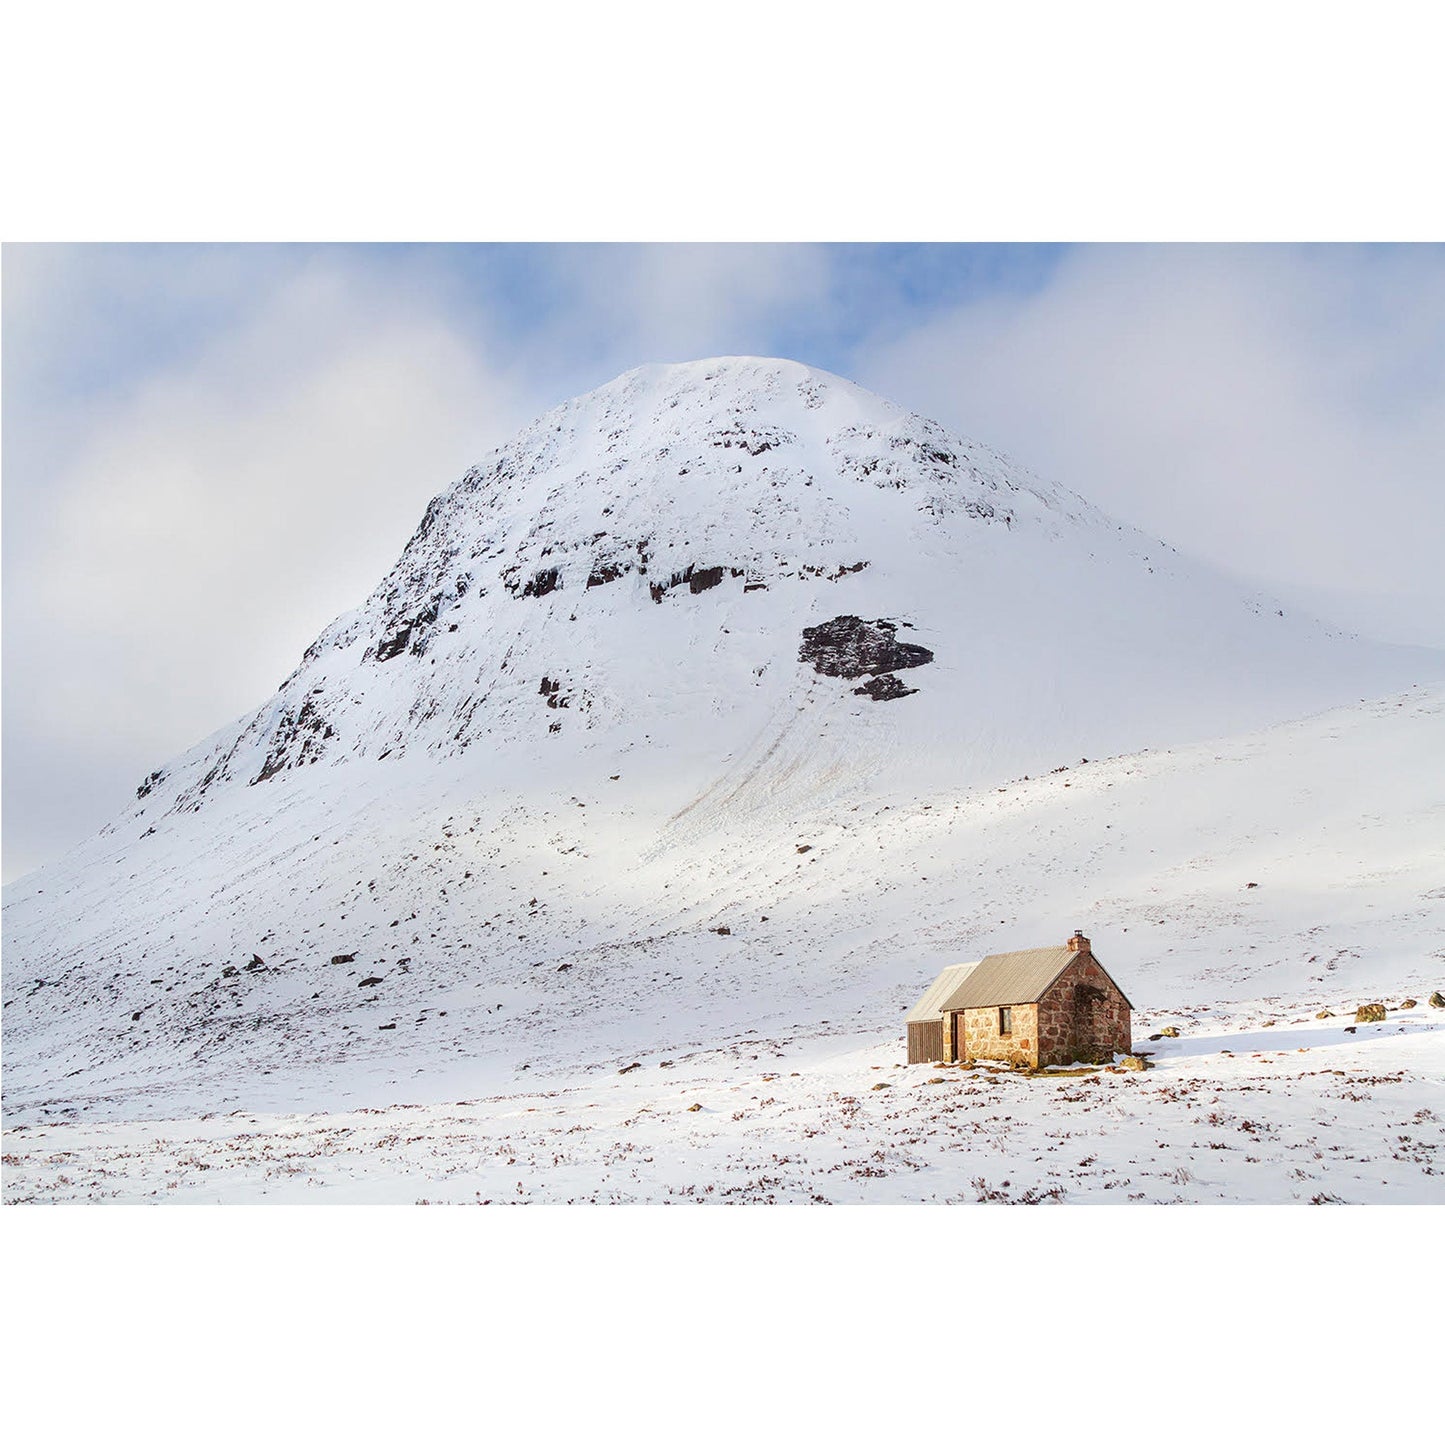 Corrour Bothy and The Devils Point | Photograph